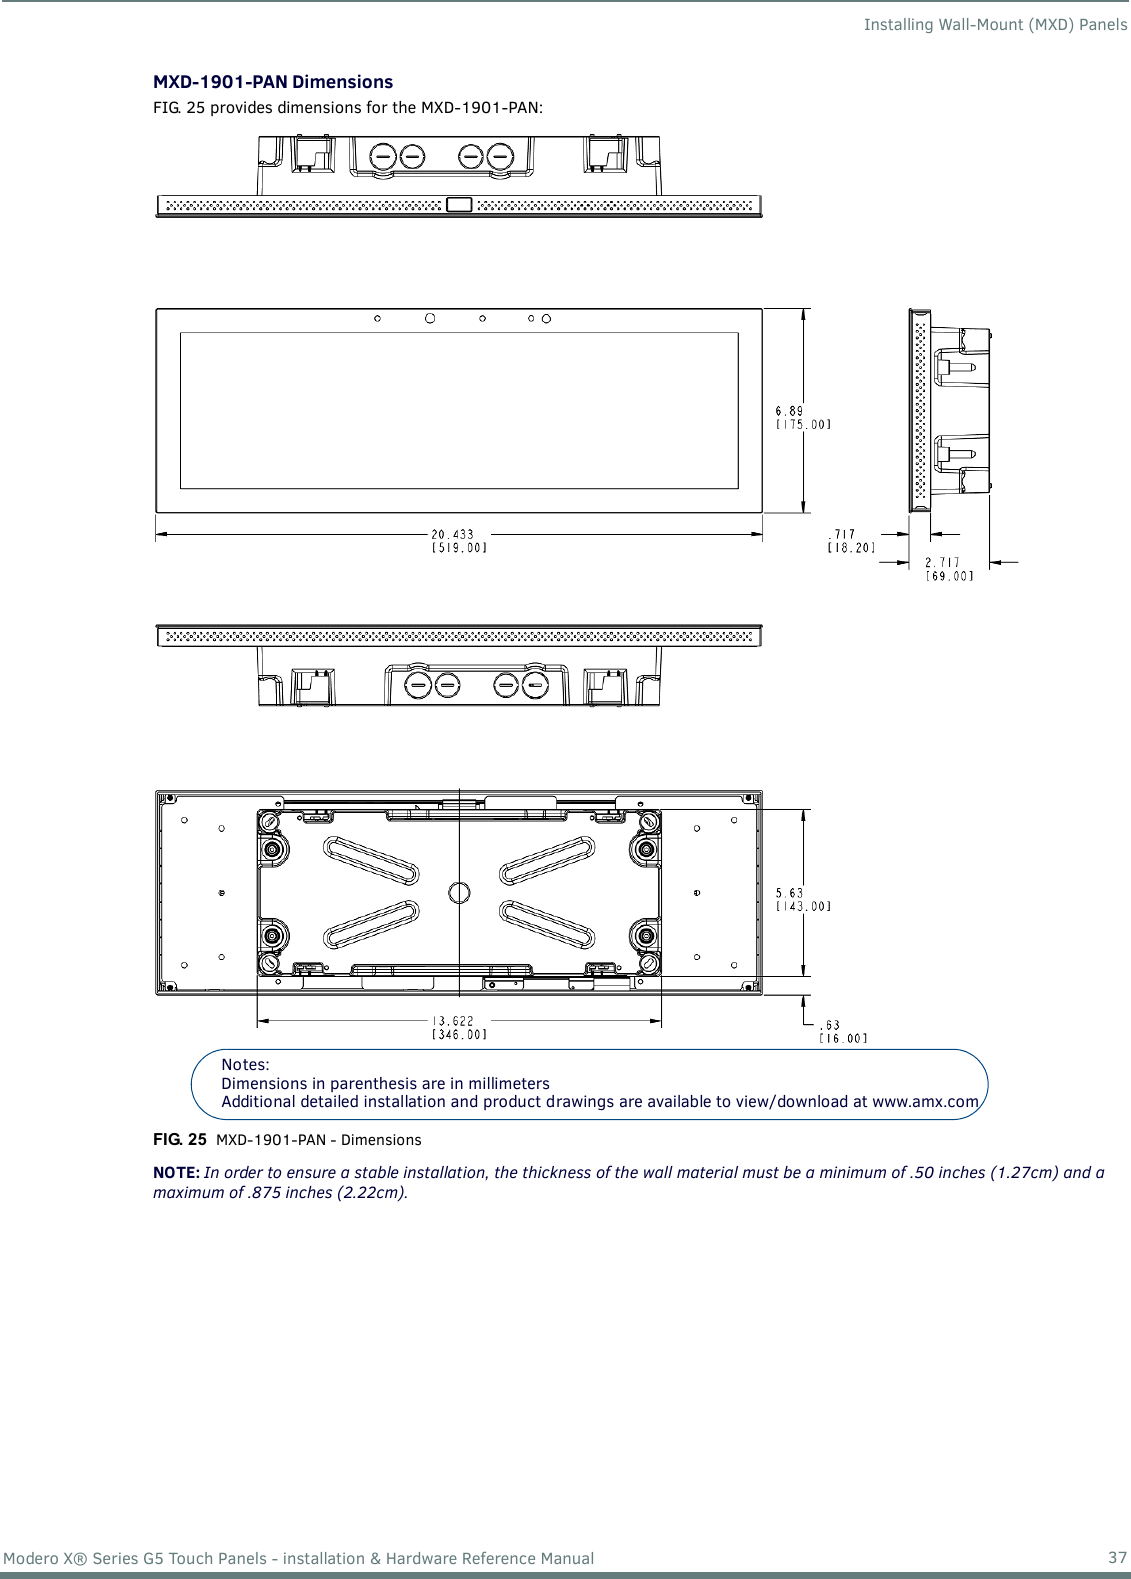 Installing Wall-Mount (MXD) Panels37Modero X® Series G5 Touch Panels - installation &amp; Hardware Reference ManualMXD-1901-PAN DimensionsFIG. 25 provides dimensions for the MXD-1901-PAN: NOTE: In order to ensure a stable installation, the thickness of the wall material must be a minimum of .50 inches (1.27cm) and a maximum of .875 inches (2.22cm).FIG. 25  MXD-1901-PAN - DimensionsNotes: Dimensions in parenthesis are in millimetersAdditional detailed installation and product drawings are available to view/download at www.amx.com 